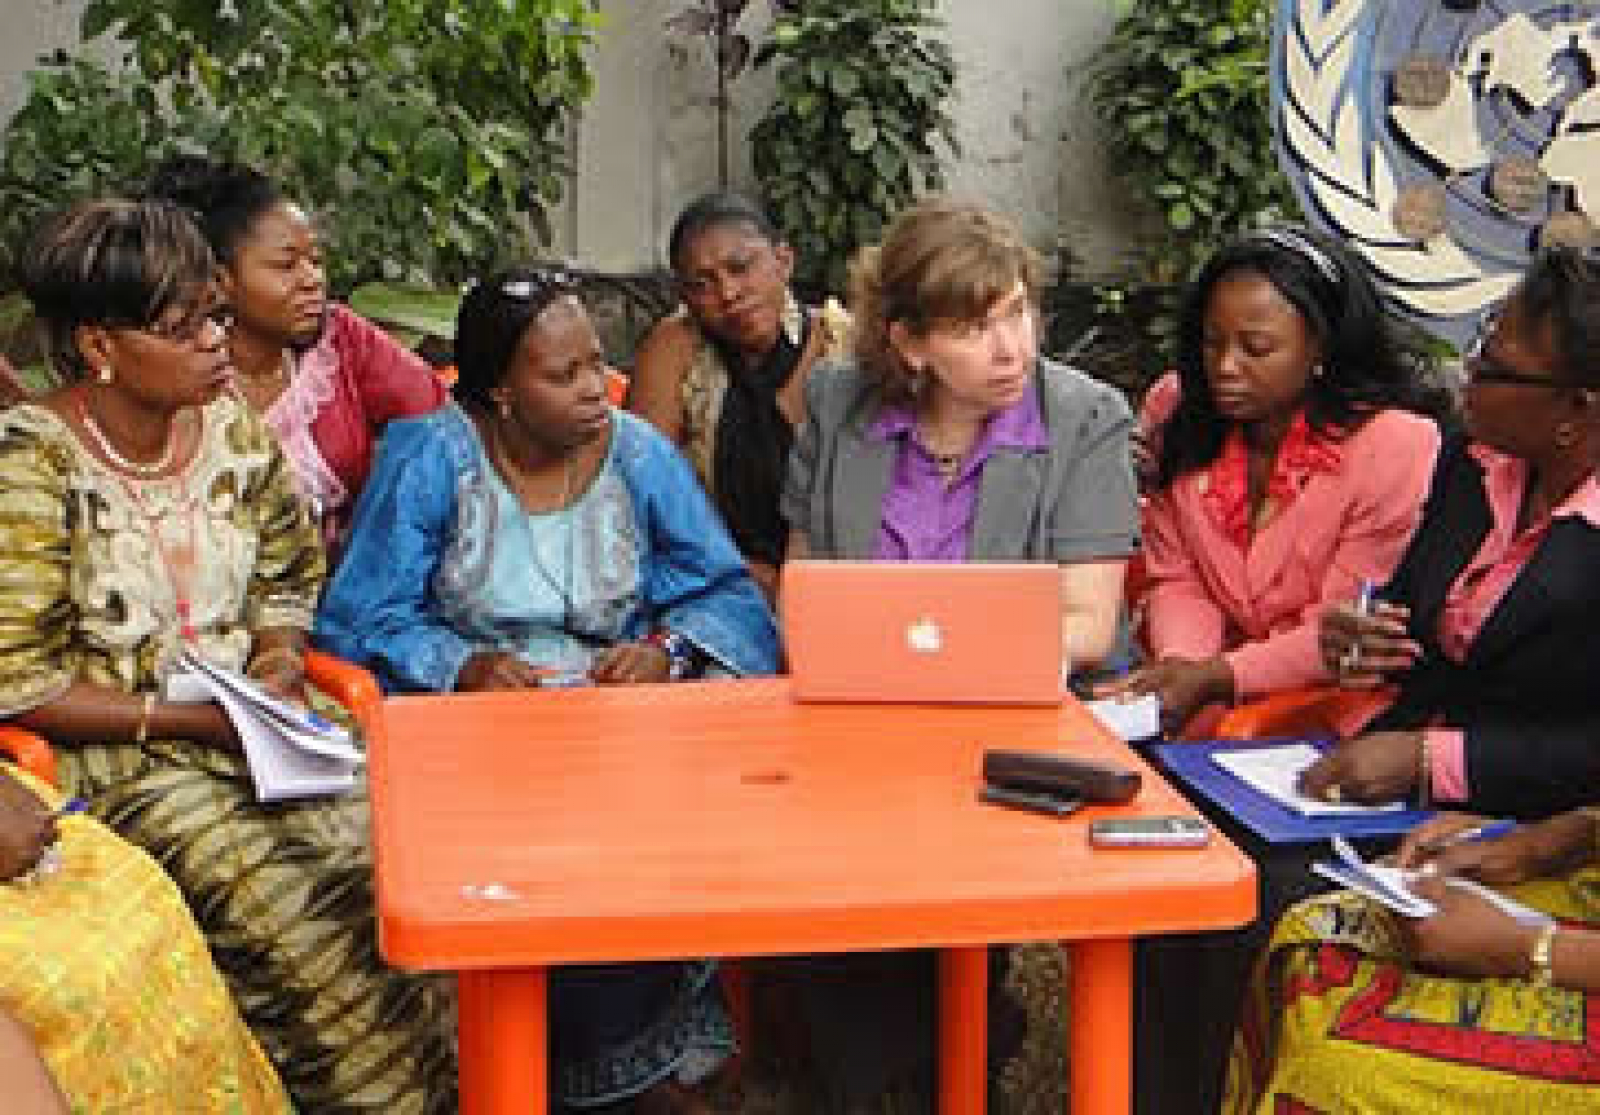 DRC Women Running for Office with Help from Global Women’s Network